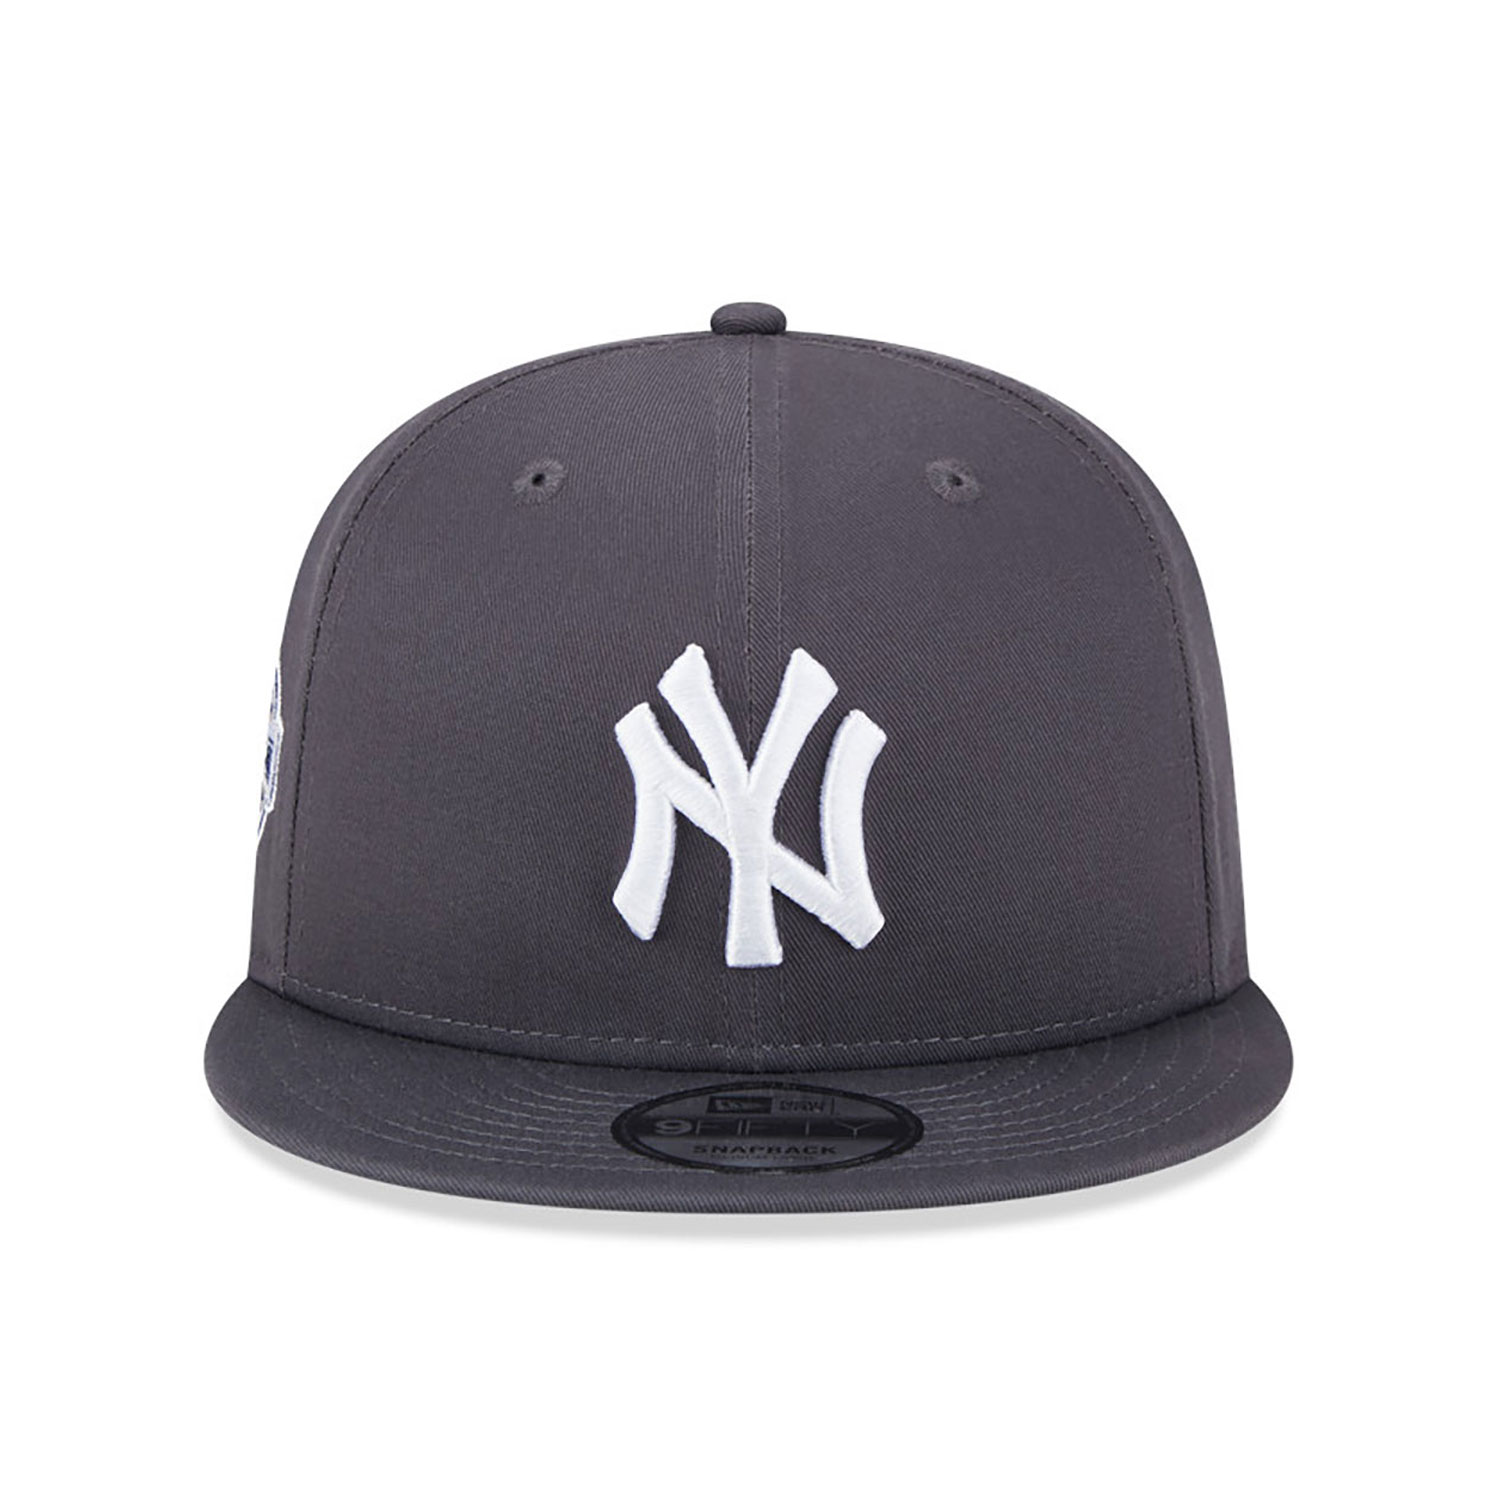 New York Yankees New Traditions Grey 9FIFTY Snapback Cap